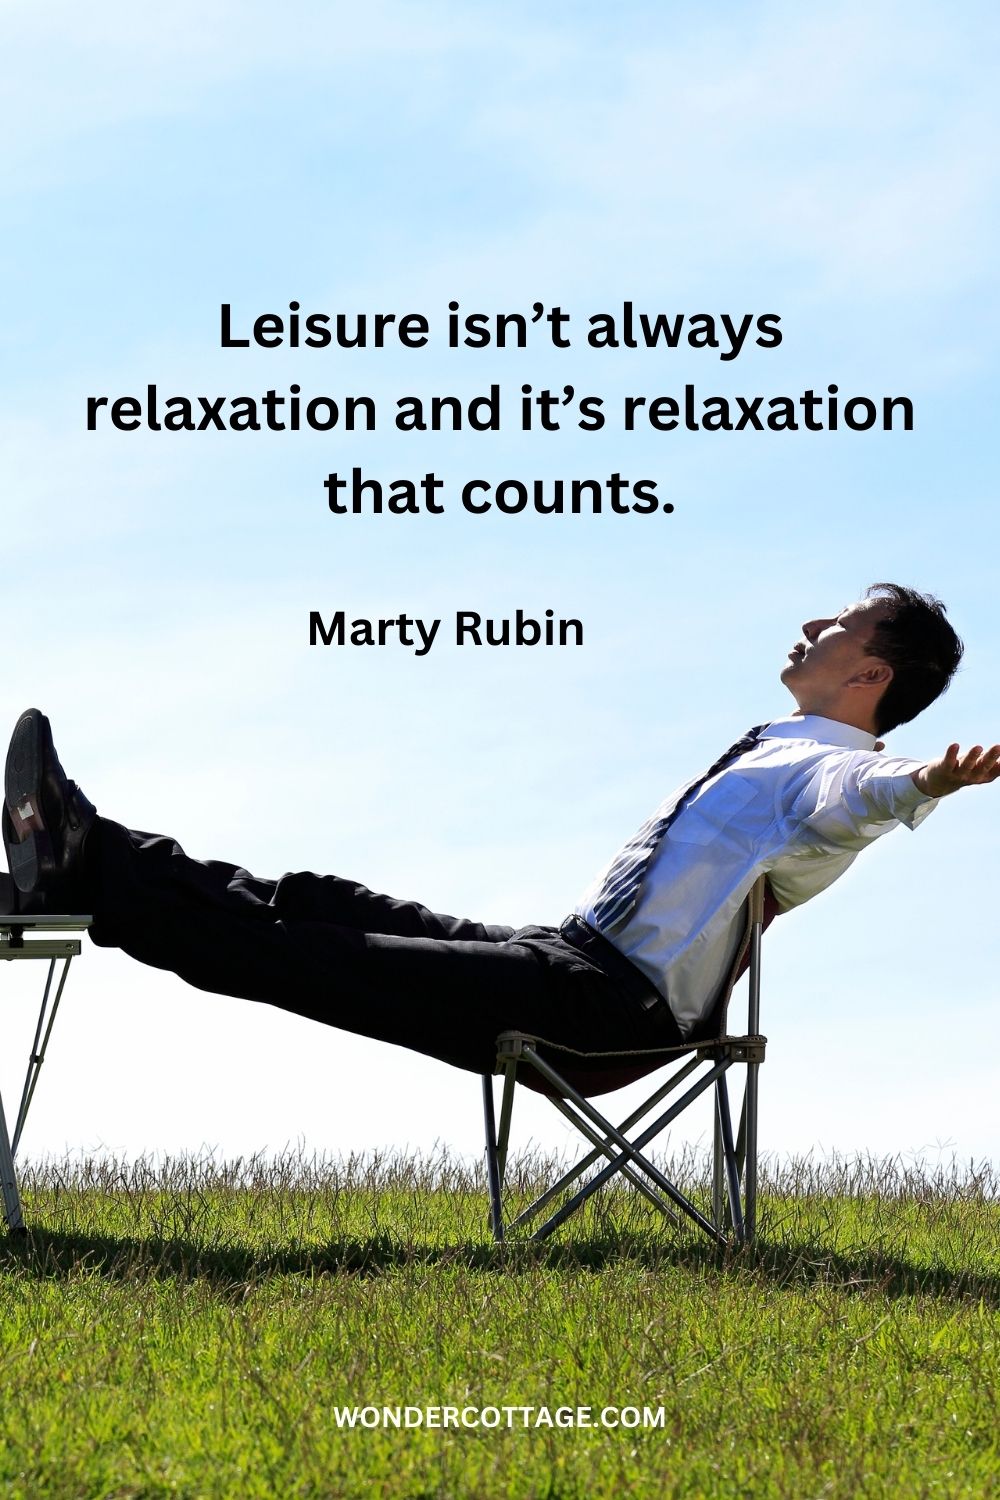 Leisure isn’t always relaxation and it’s relaxation that counts. Marty Rubin